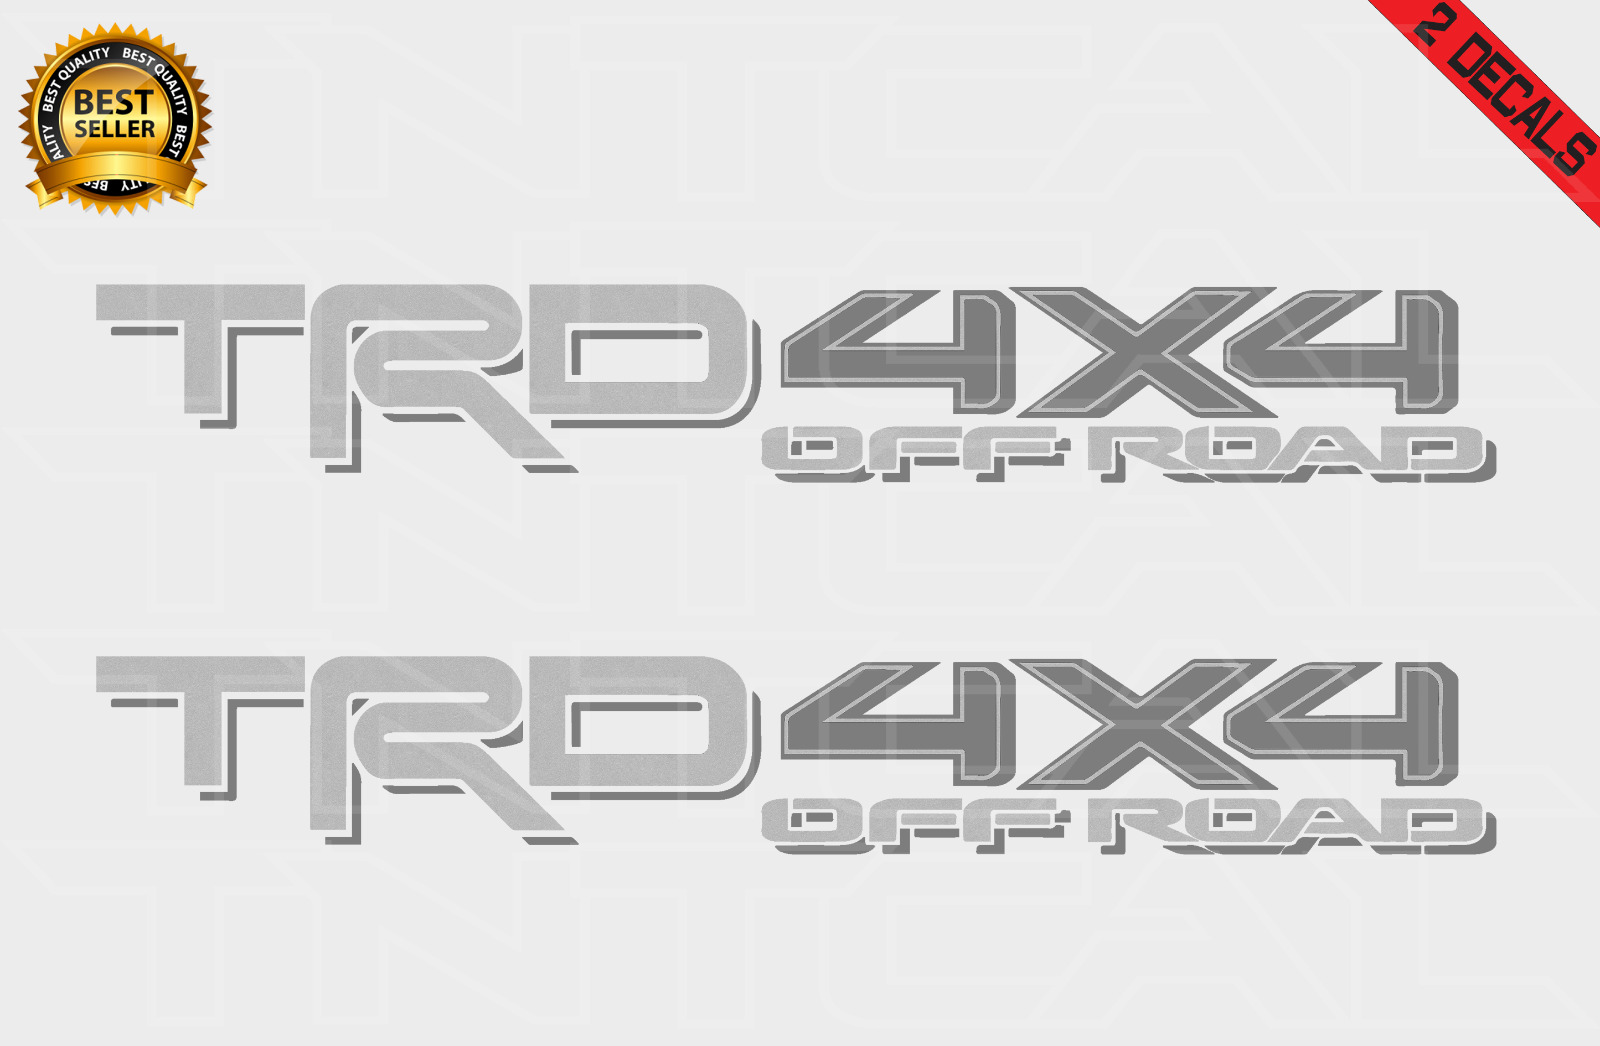 TRD 4x4 Off Road Decal Set Fits 2016-2020 Tacoma Tundra Sticker Silver/Gray